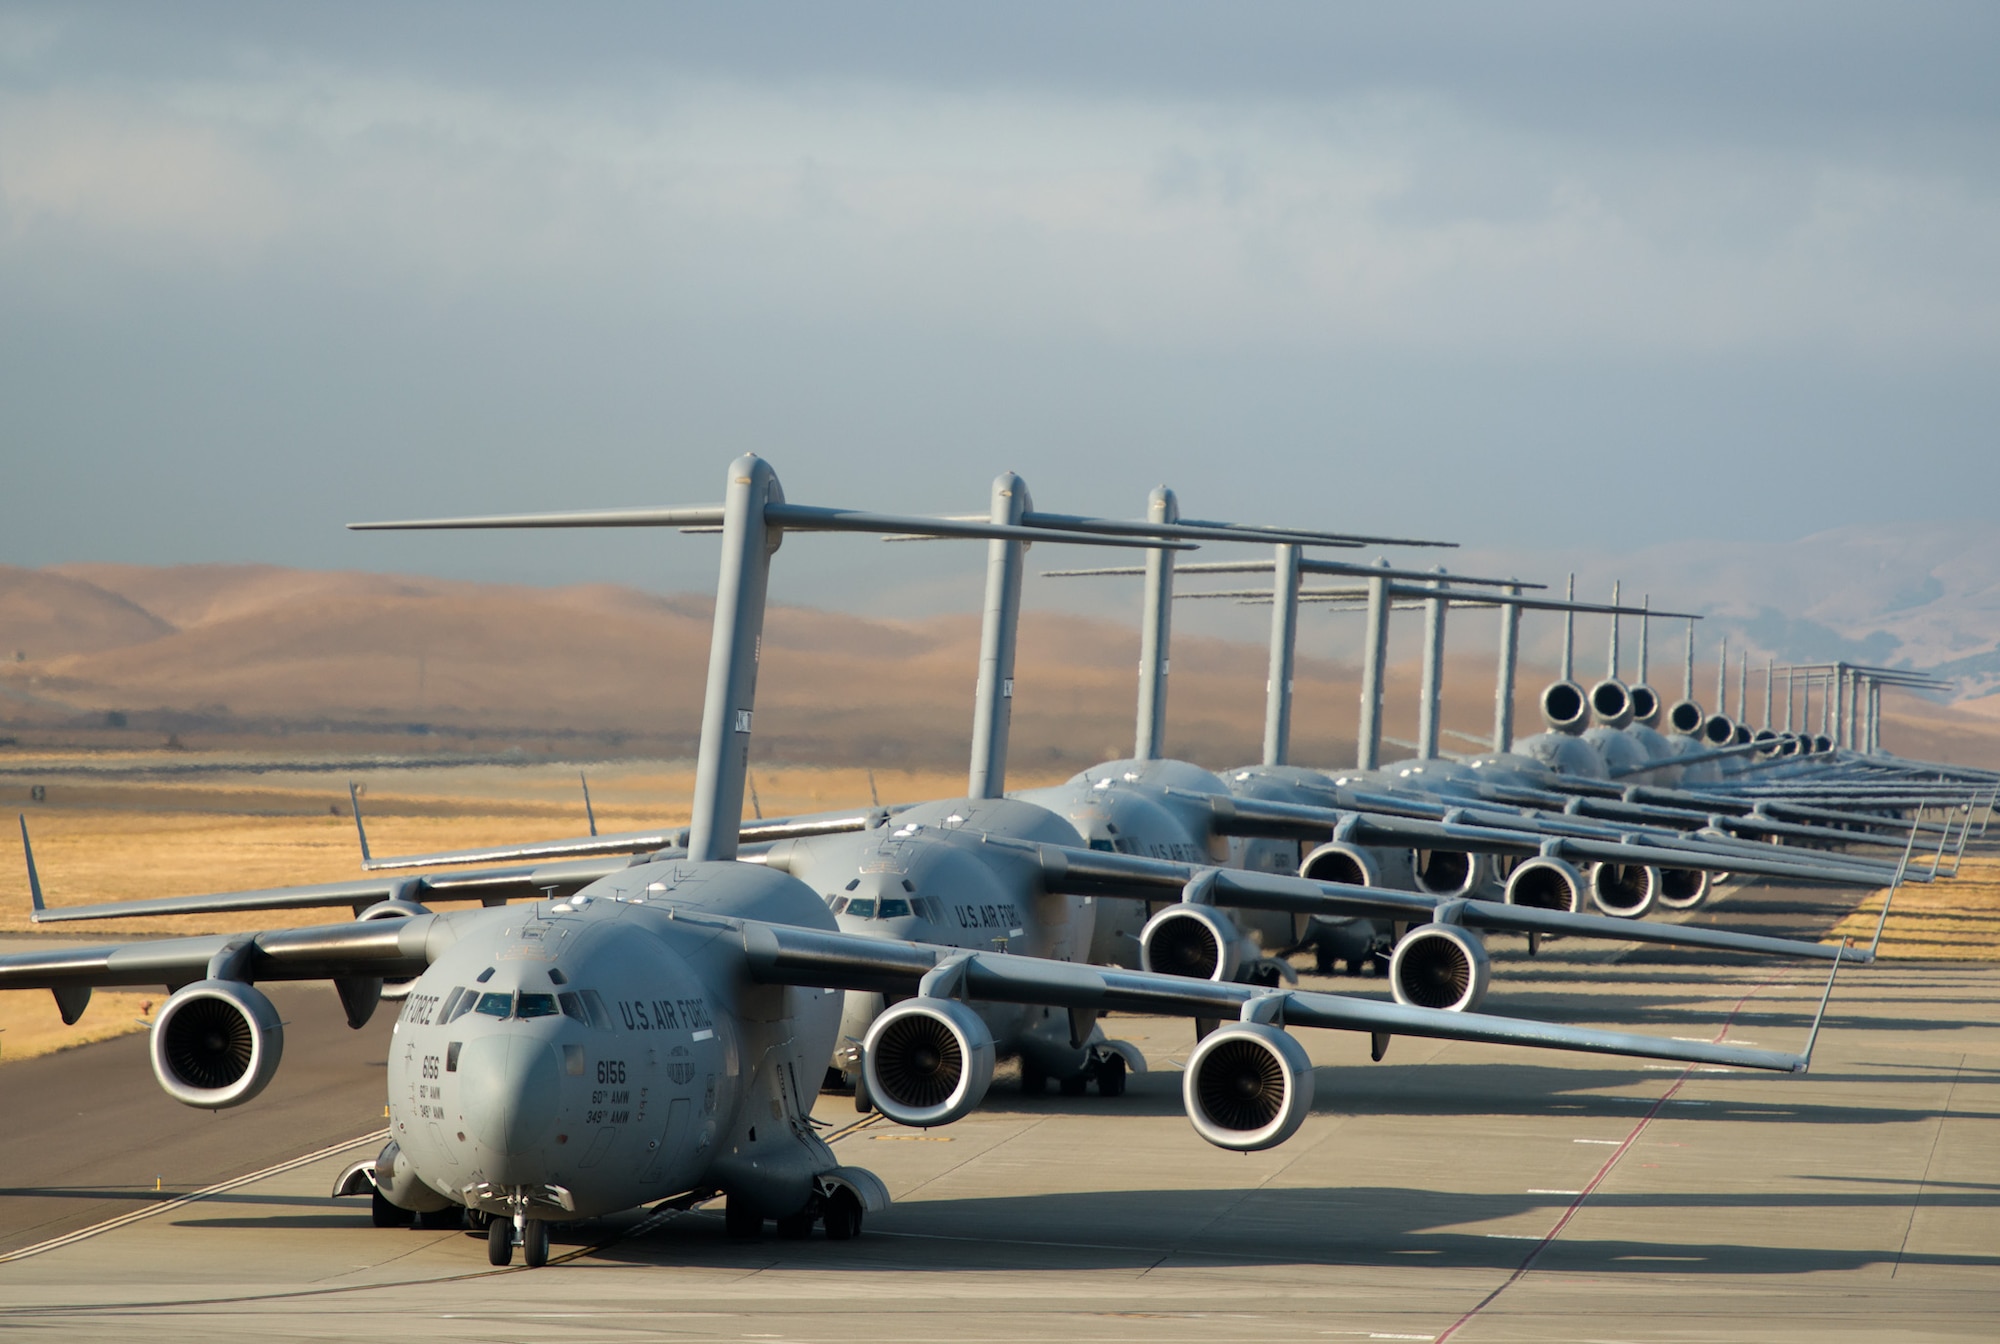 A 22-aircraft "freedom launch" took place at Travis AFB, Calif., Sept. 11, 2013. Seven C-17 Globemaster IIIs, 11 KC-10 Extenders and four C-5B Galaxies from the 60th Air Mobility Wing lined up in what is historically referred to as an "elephant walk," then launched consecutively over 36 minutes to take part in Air Mobility Command missions. The first plane in the lineup, a C-17, launched at 8:46 a.m., the same time terrorists crashed American Airlines Flight 11 into the North Tower of the World Trade Center in New York City 12 years earlier. (U.S. Air Force photo/Ken Wright)